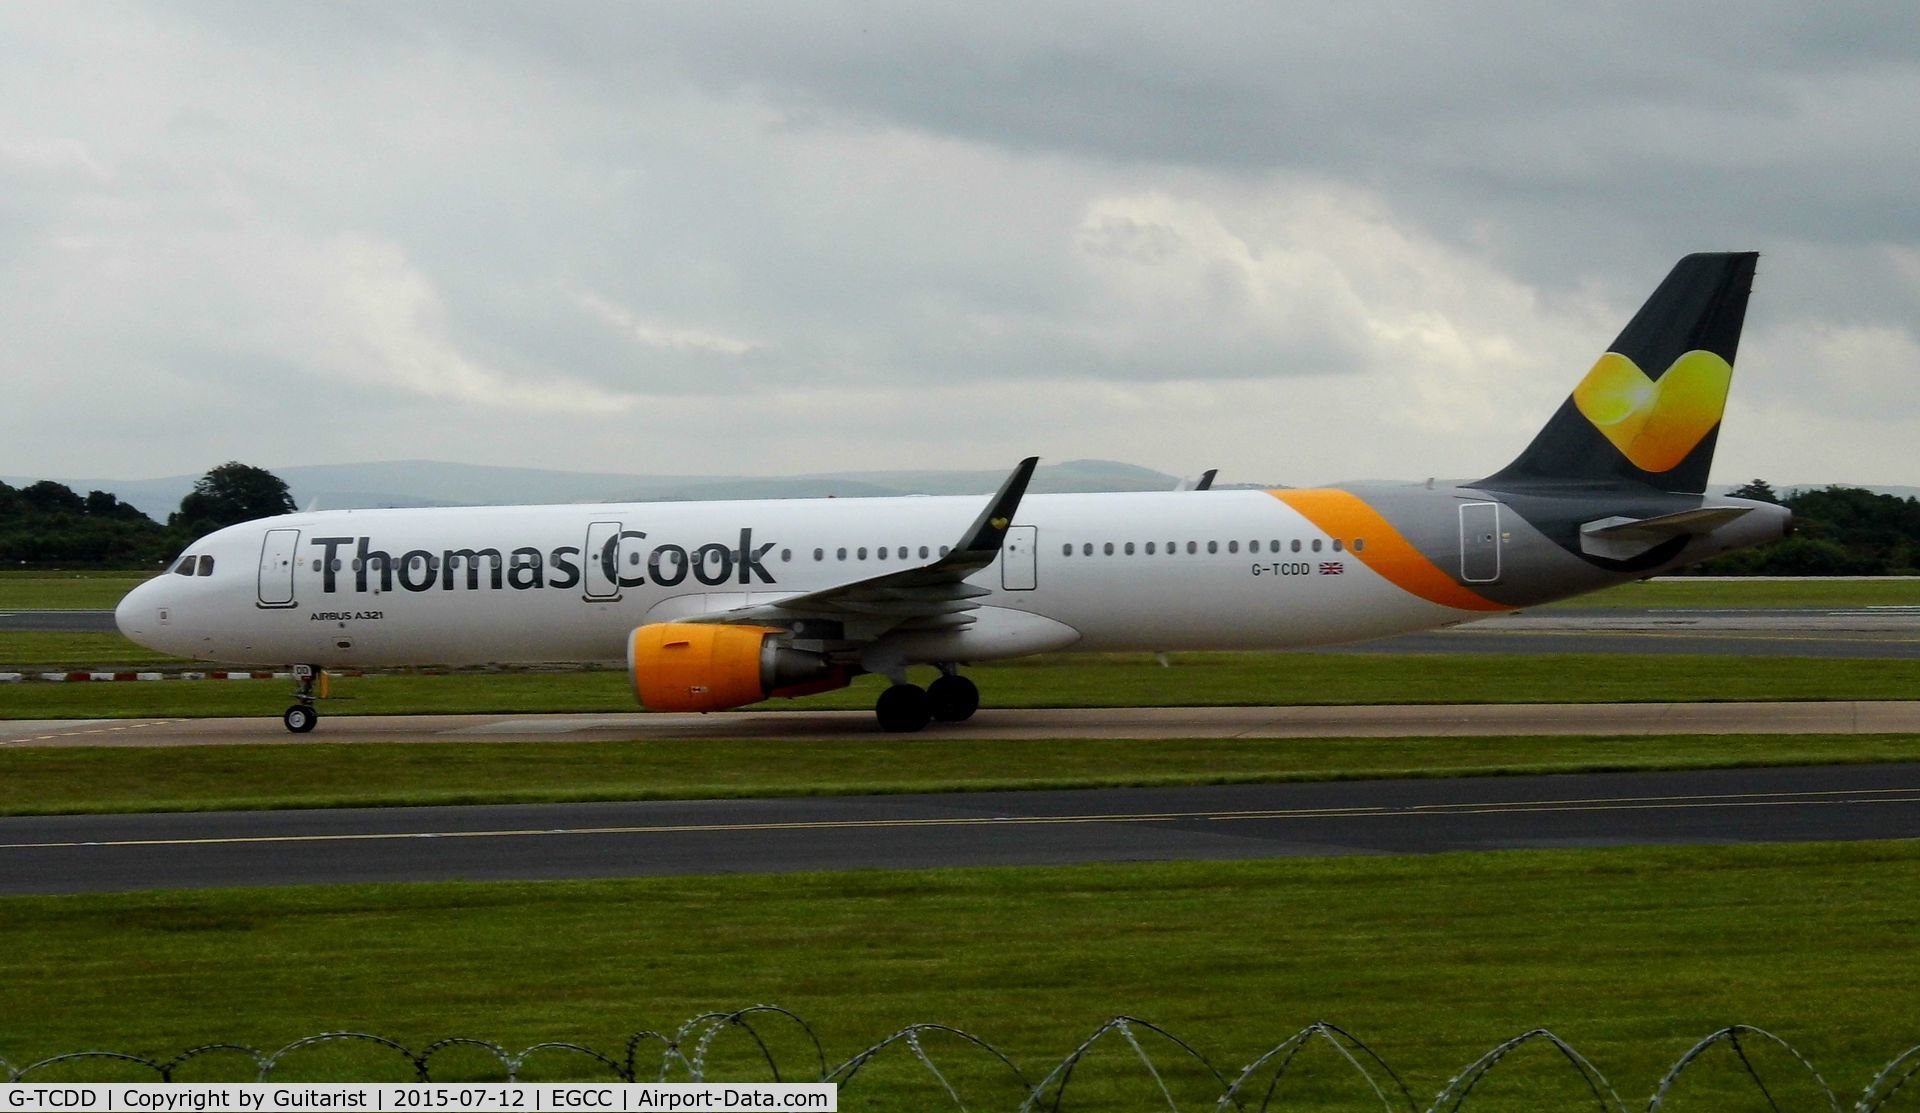 G-TCDD, 2014 Airbus A321-211 C/N 6038, At Manchester